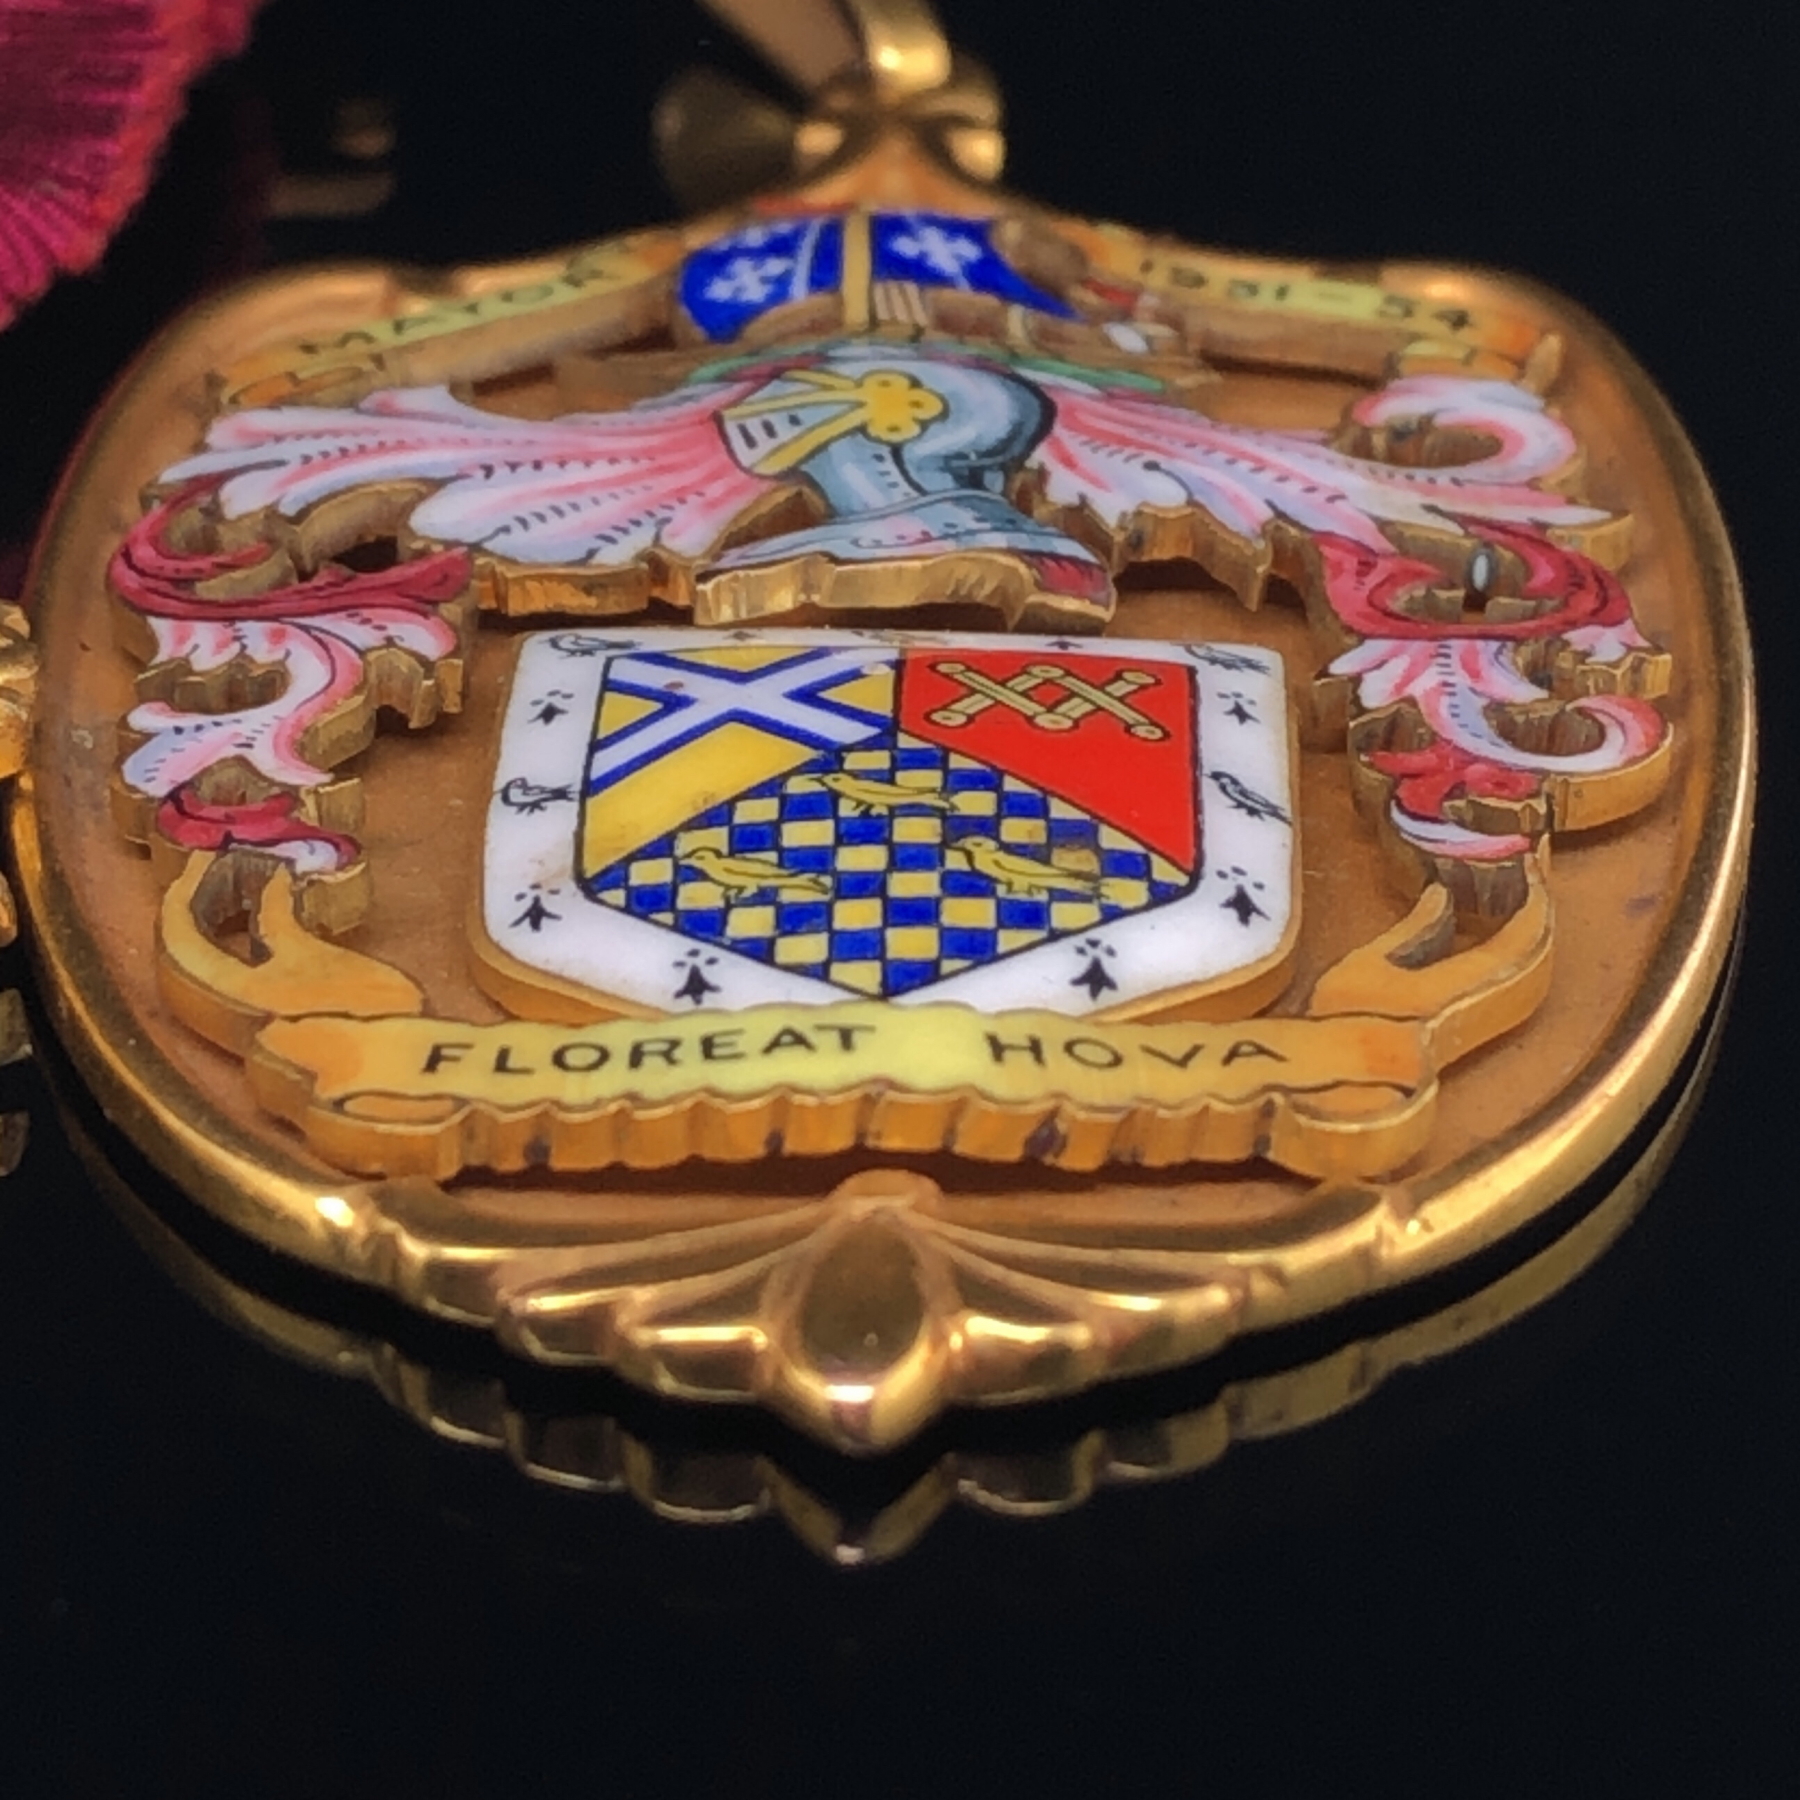 A HALLMARKED 9ct GOLD AND ENAMEL MAYORS MEDALLION, ENGRAVED WITH ENAMEL BANNERS 1951-54, AND FLOREAT - Image 9 of 11